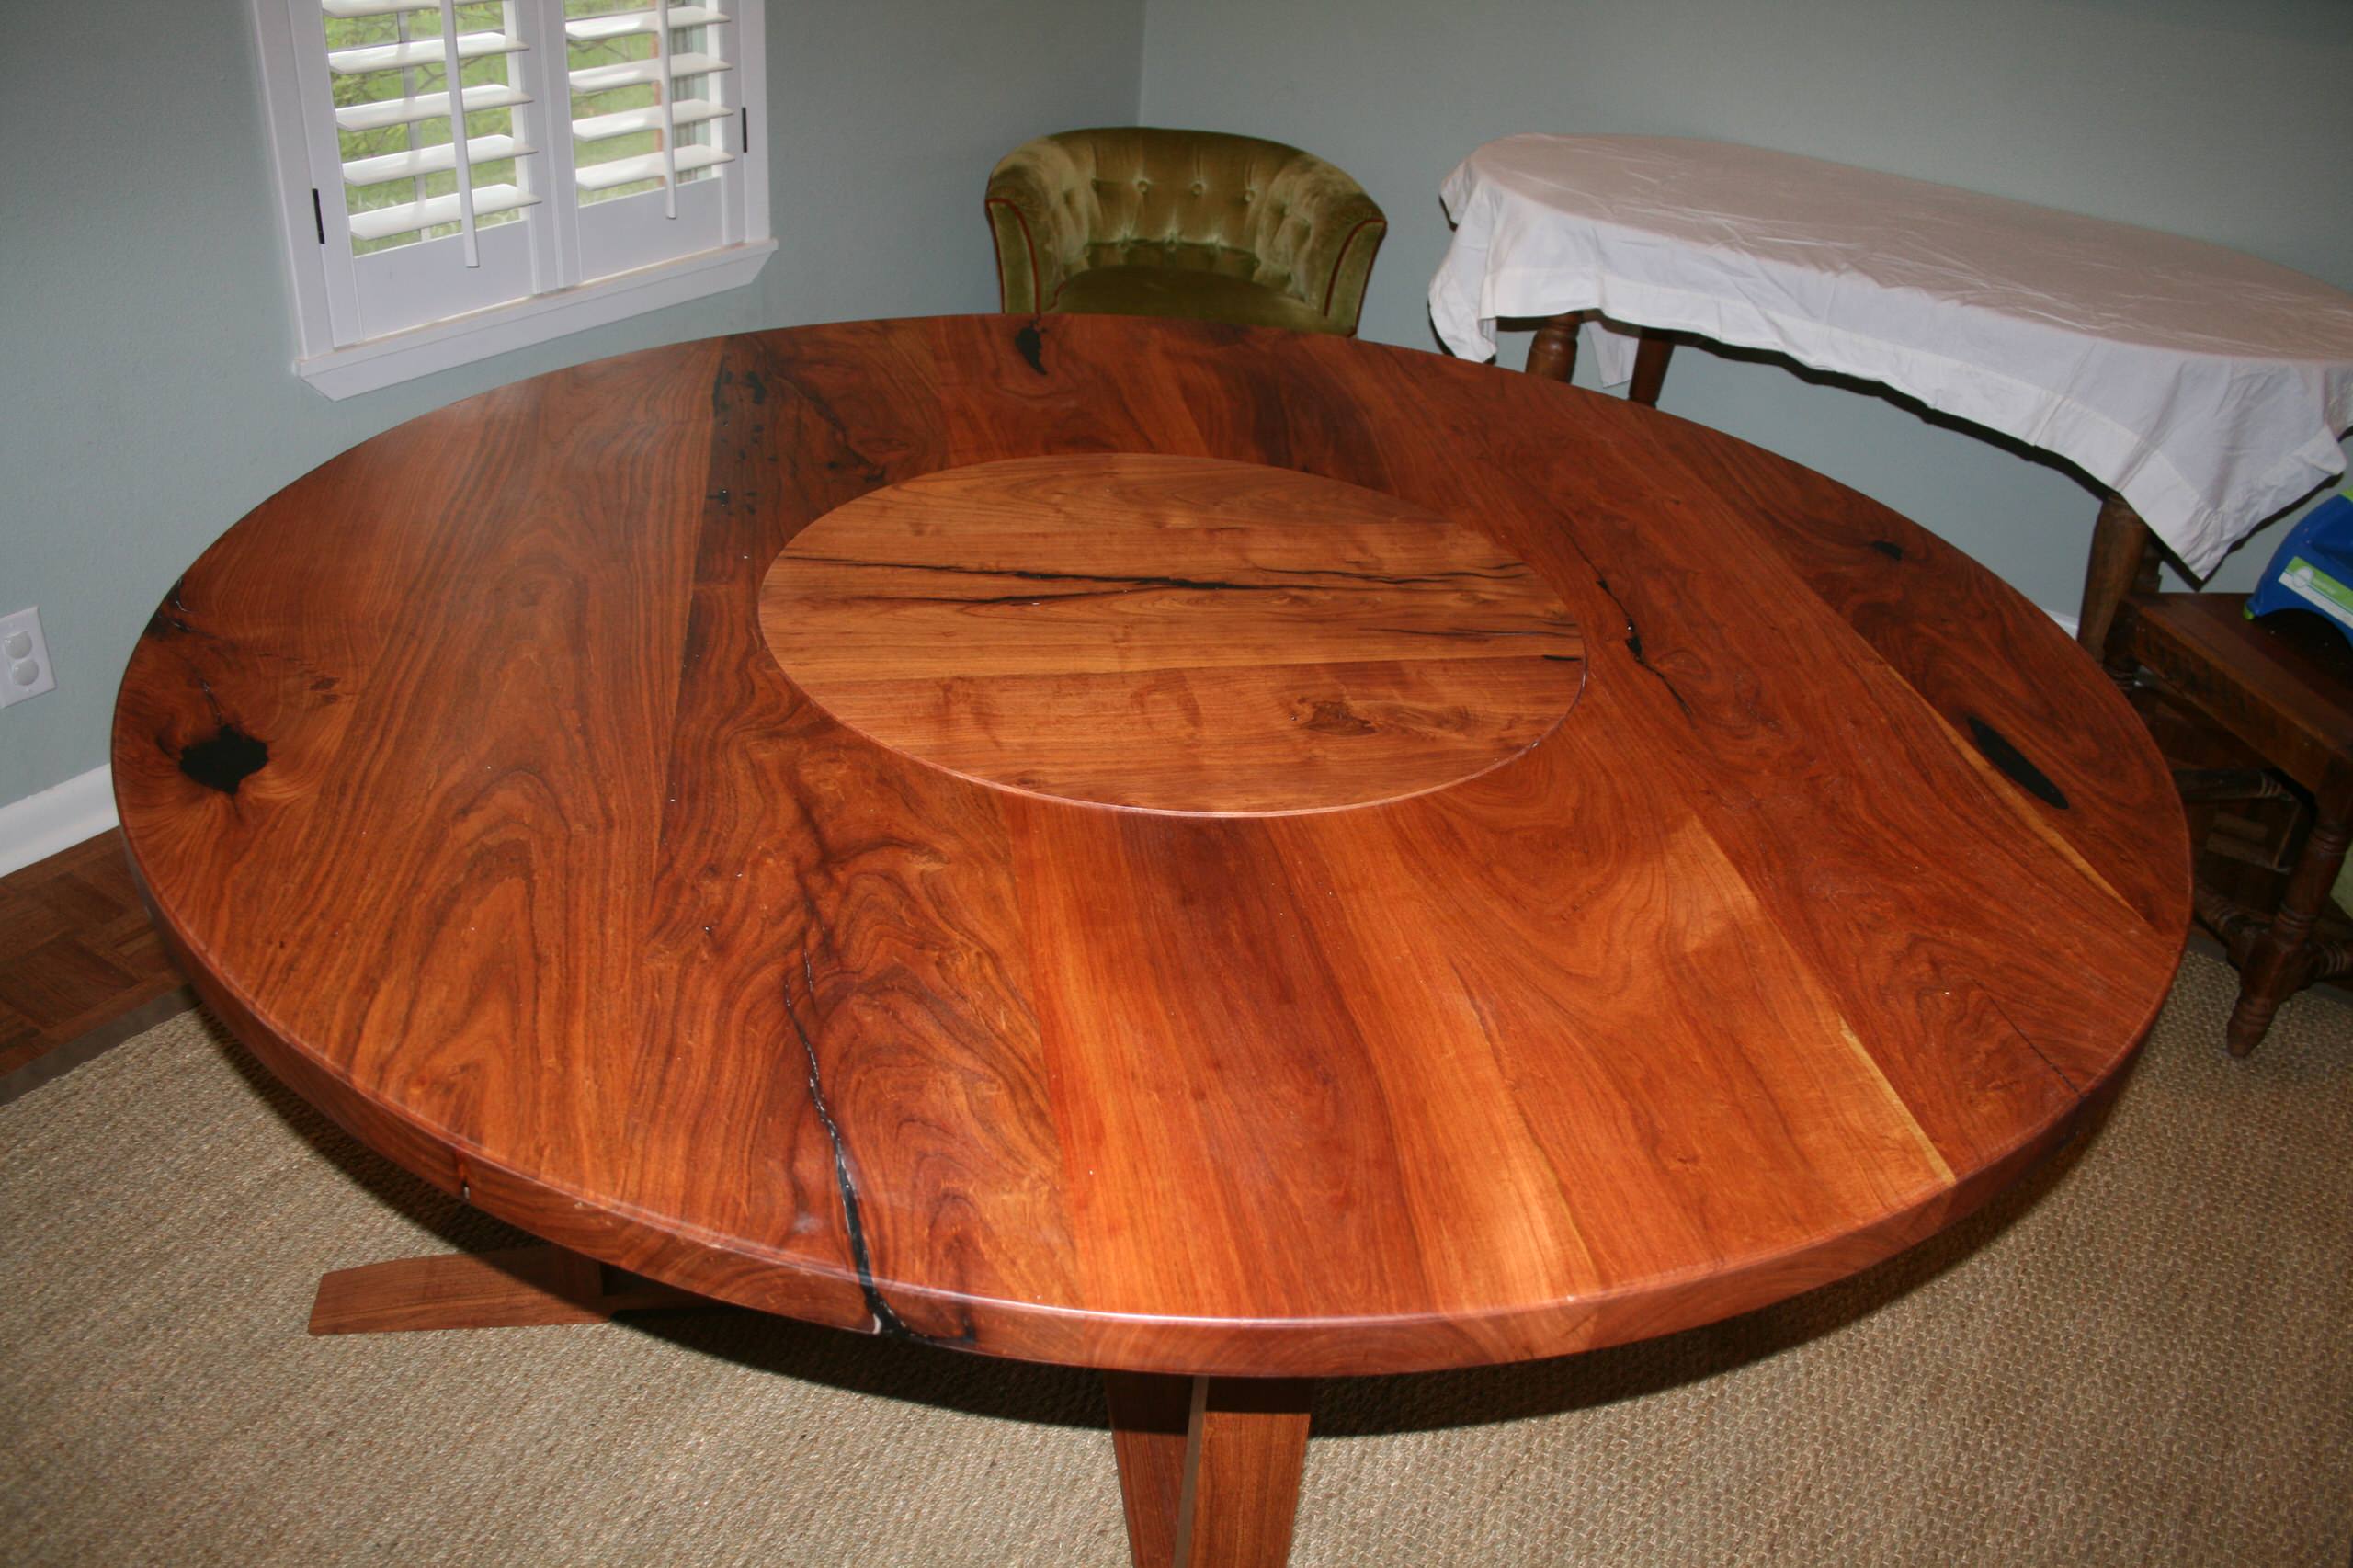 Mesquite table with lazy susan